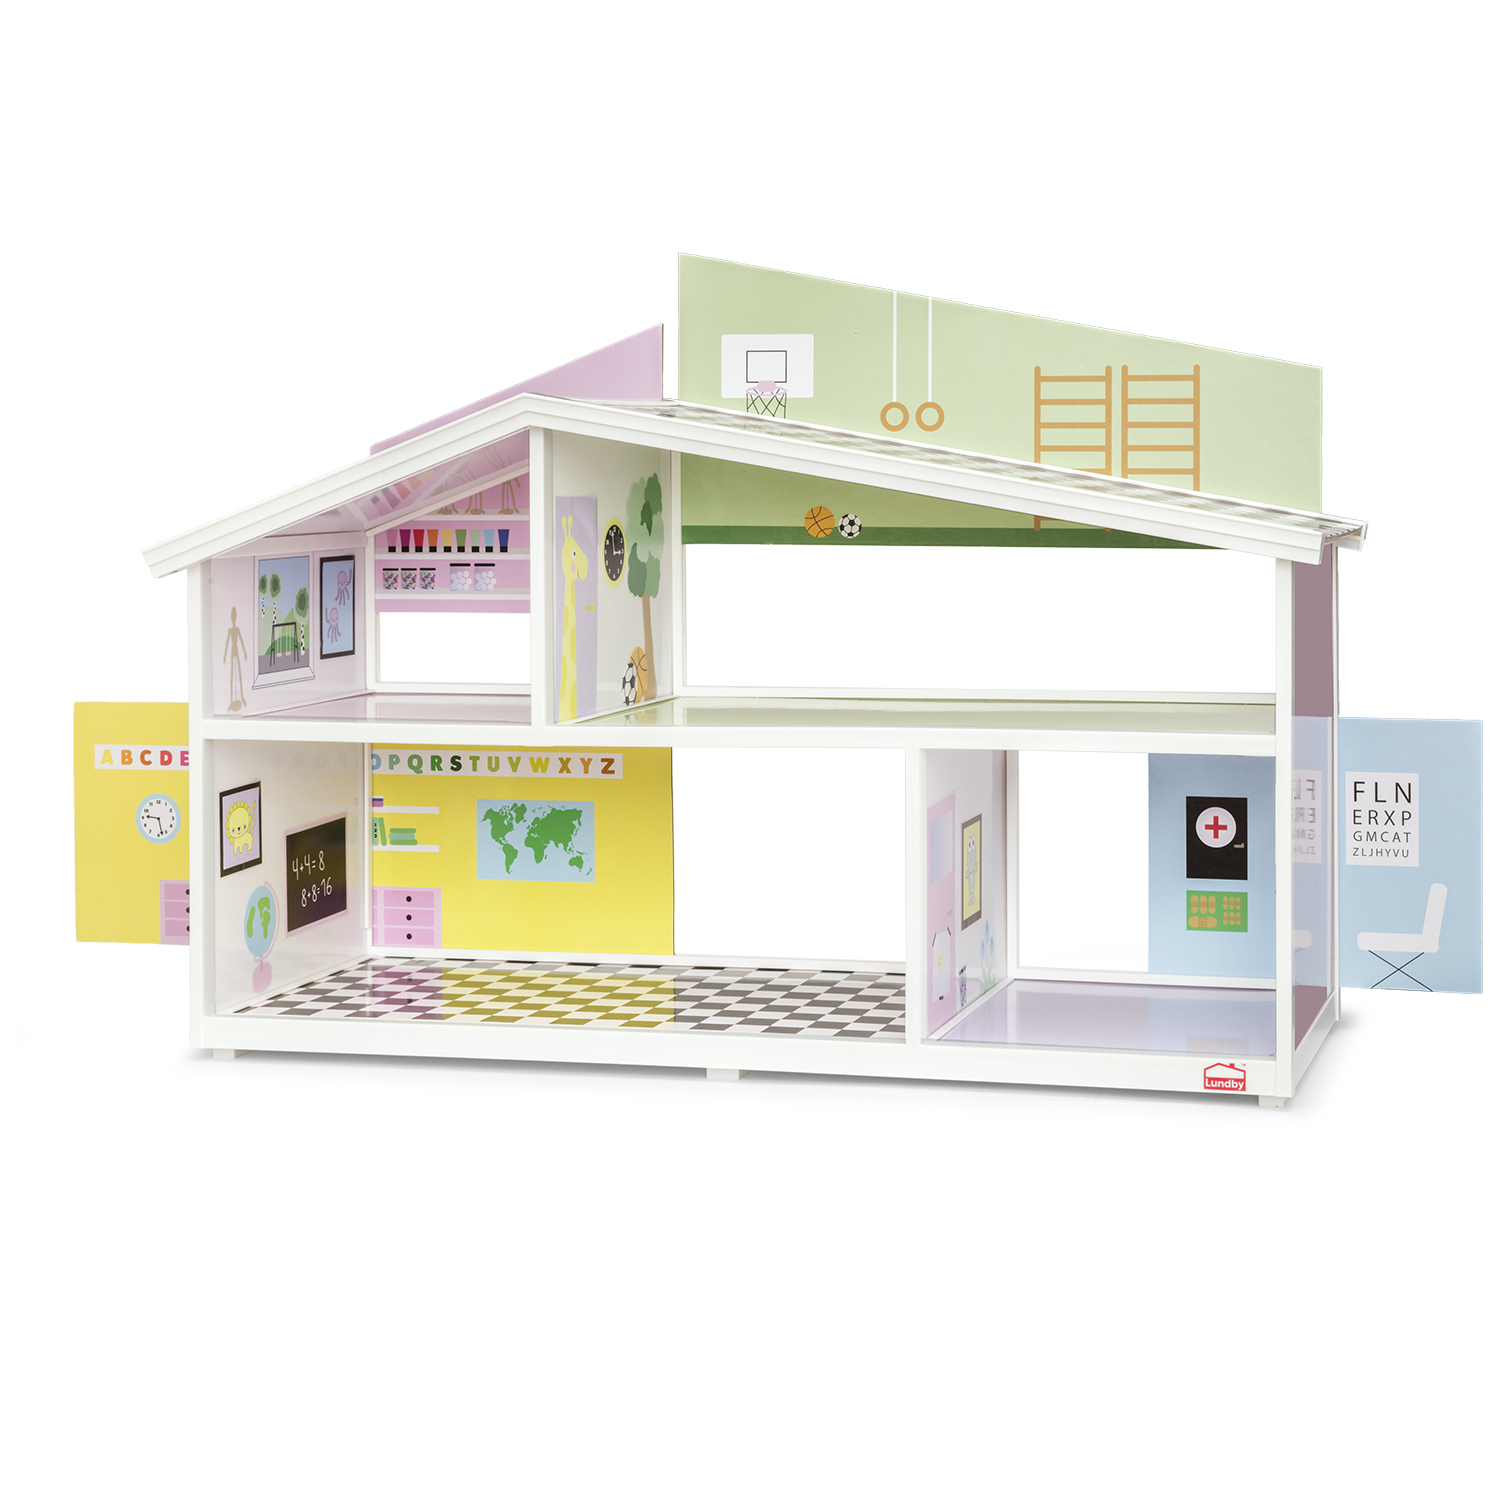 Doll house furniture & doll house accessories lundby wall set school